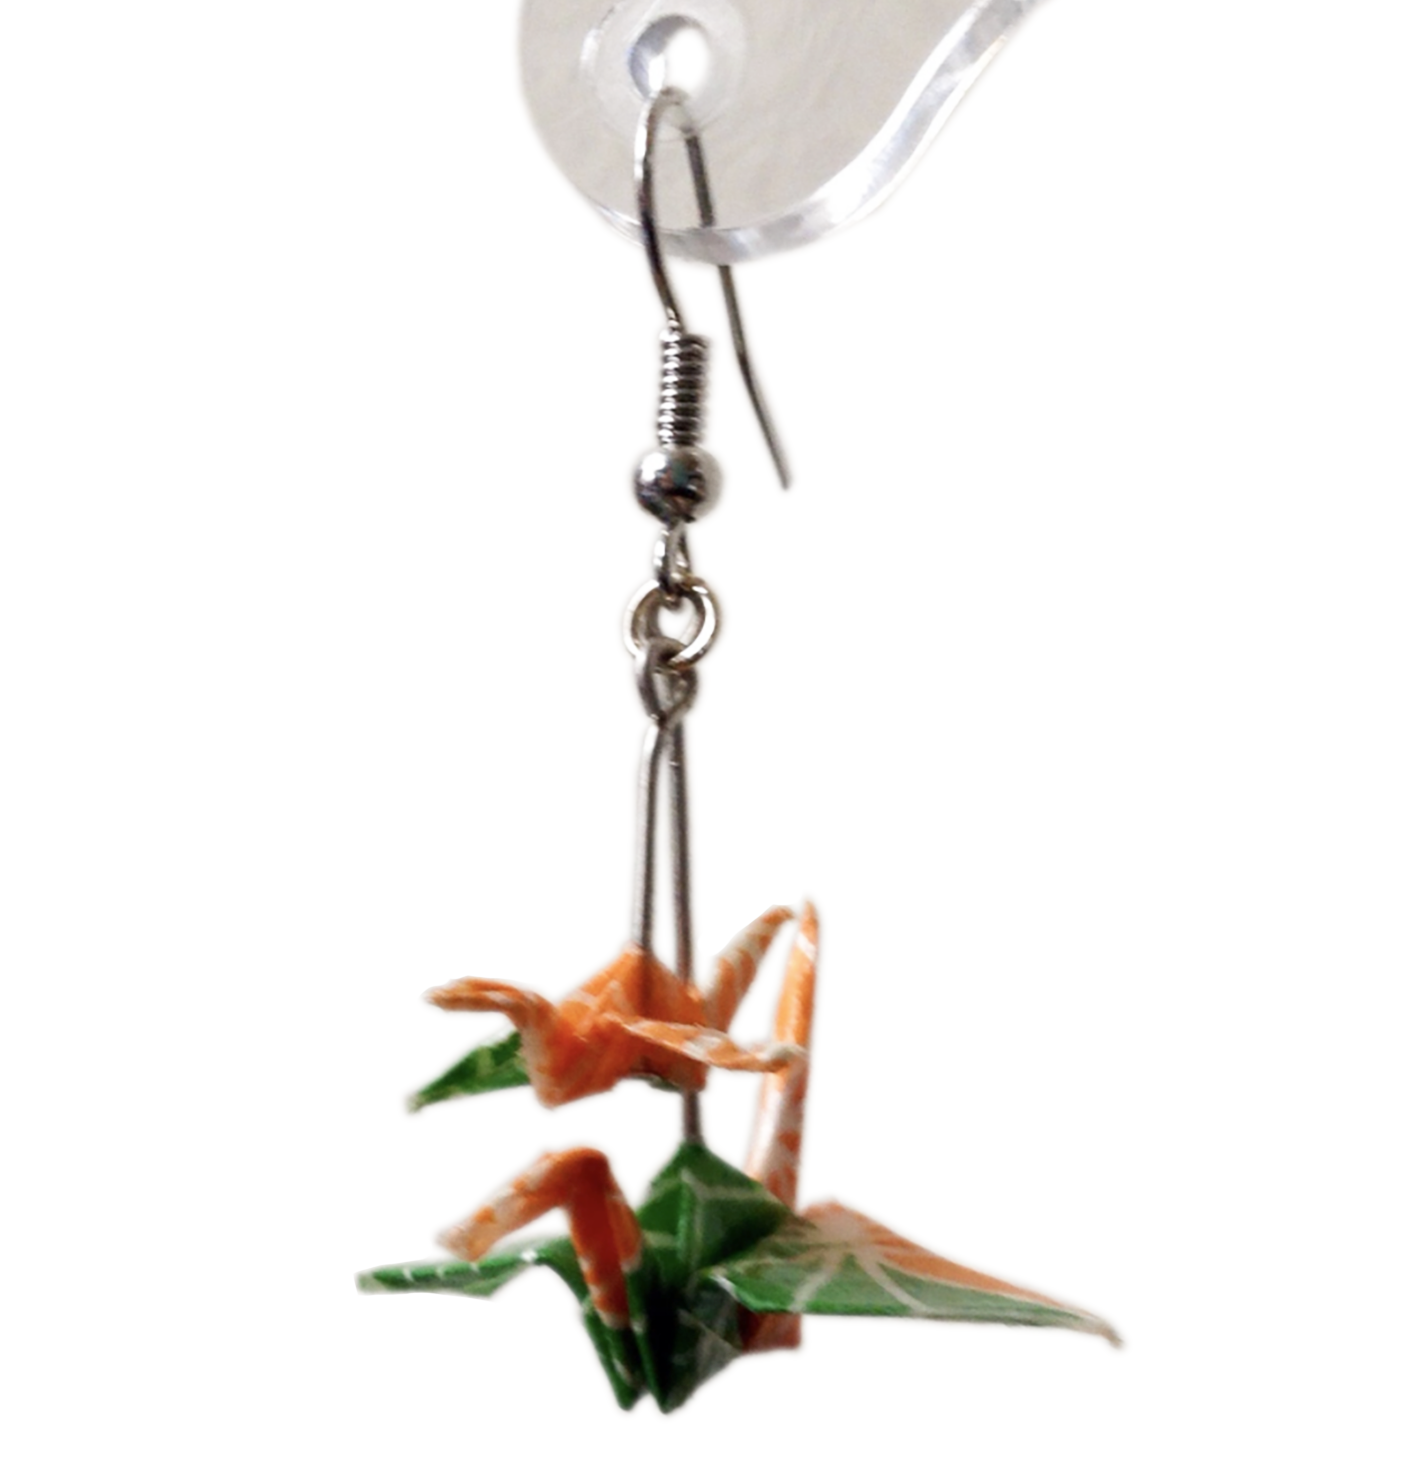 Orange and green paper crane earring on white background